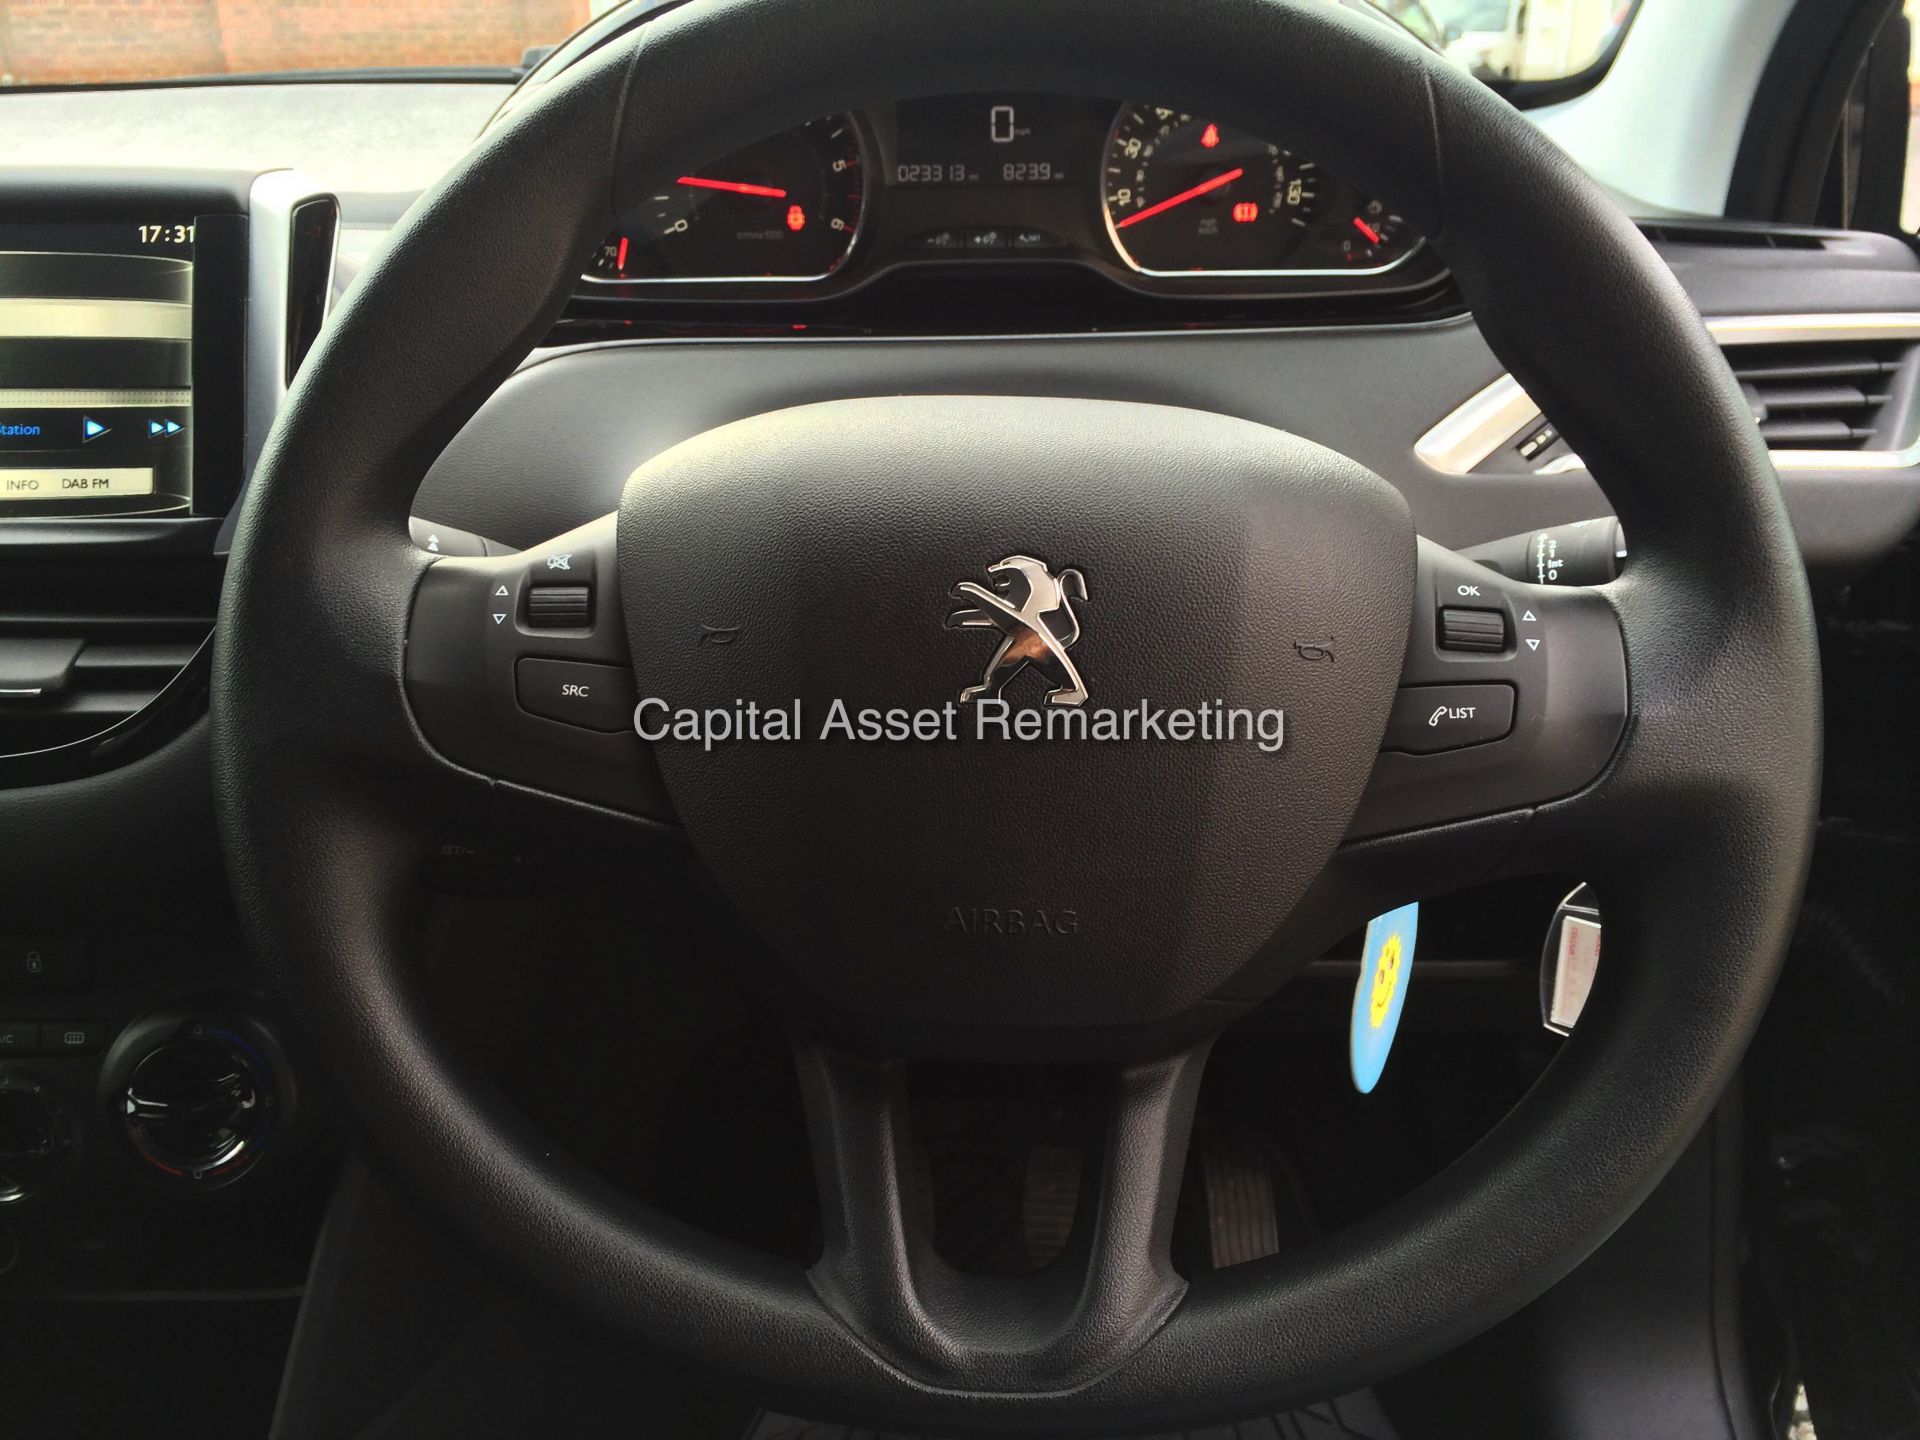 PEUGEOT 208 1.4 HDI 'ACTIVE' 5 DOOR (2014 - 14 REG)  **OWNED BY PEUGEOT FROM NEW** - Image 12 of 15